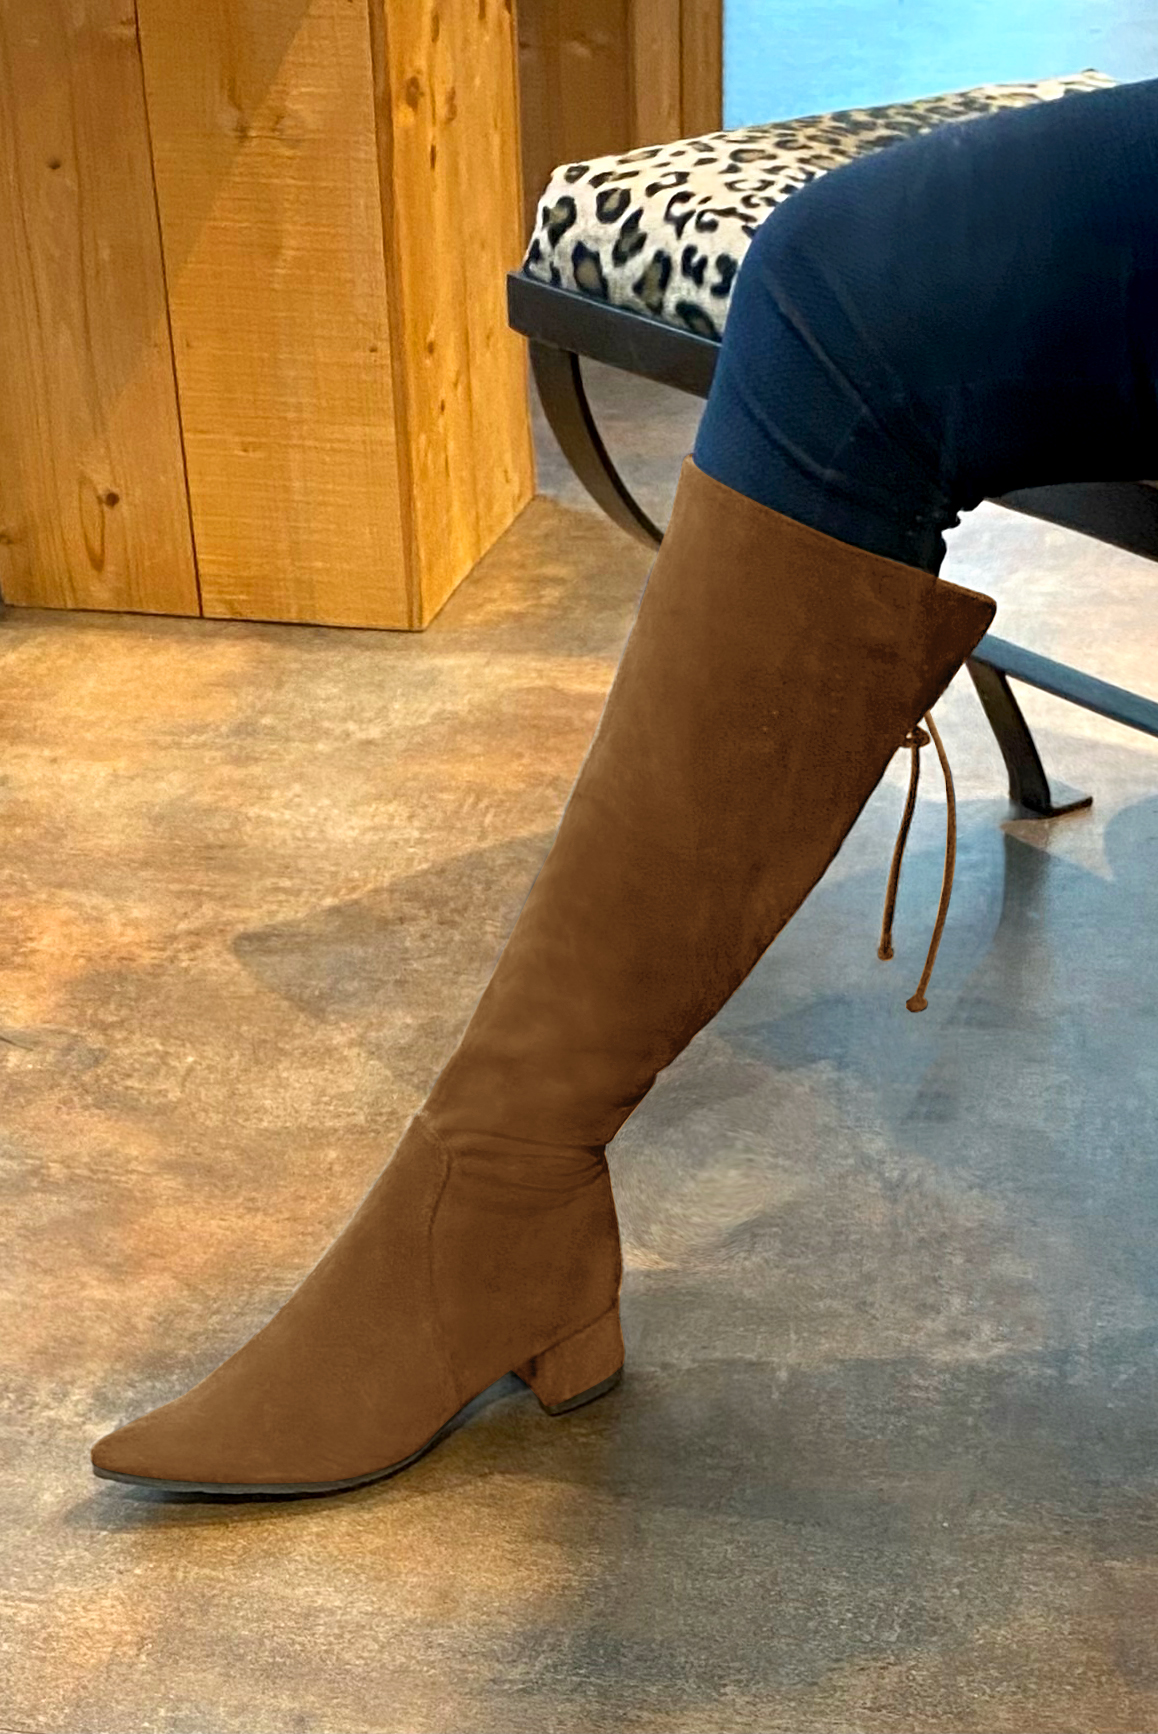 Caramel brown women's knee-high boots, with laces at the back. Tapered toe. Low flare heels. Made to measure. Worn view - Florence KOOIJMAN